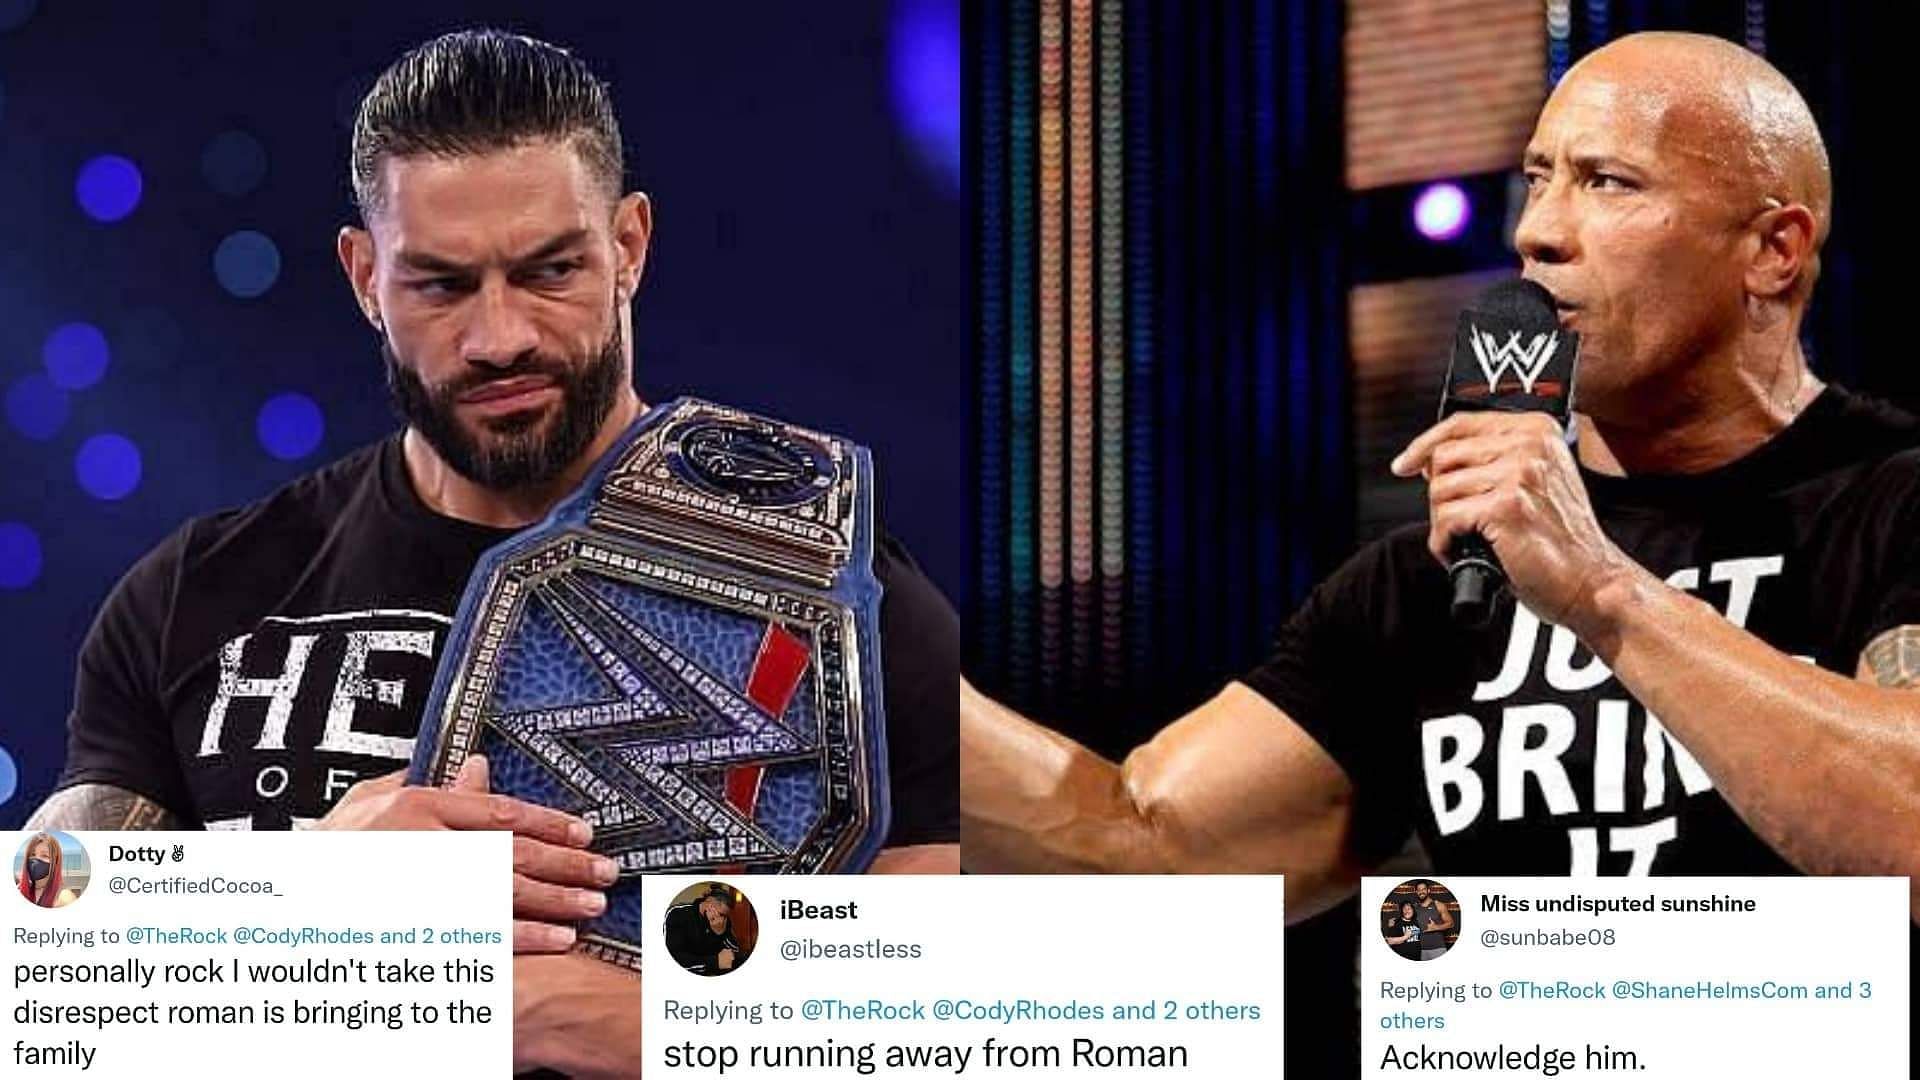 The WWE Universe wants The Rock to face Roman Reigns